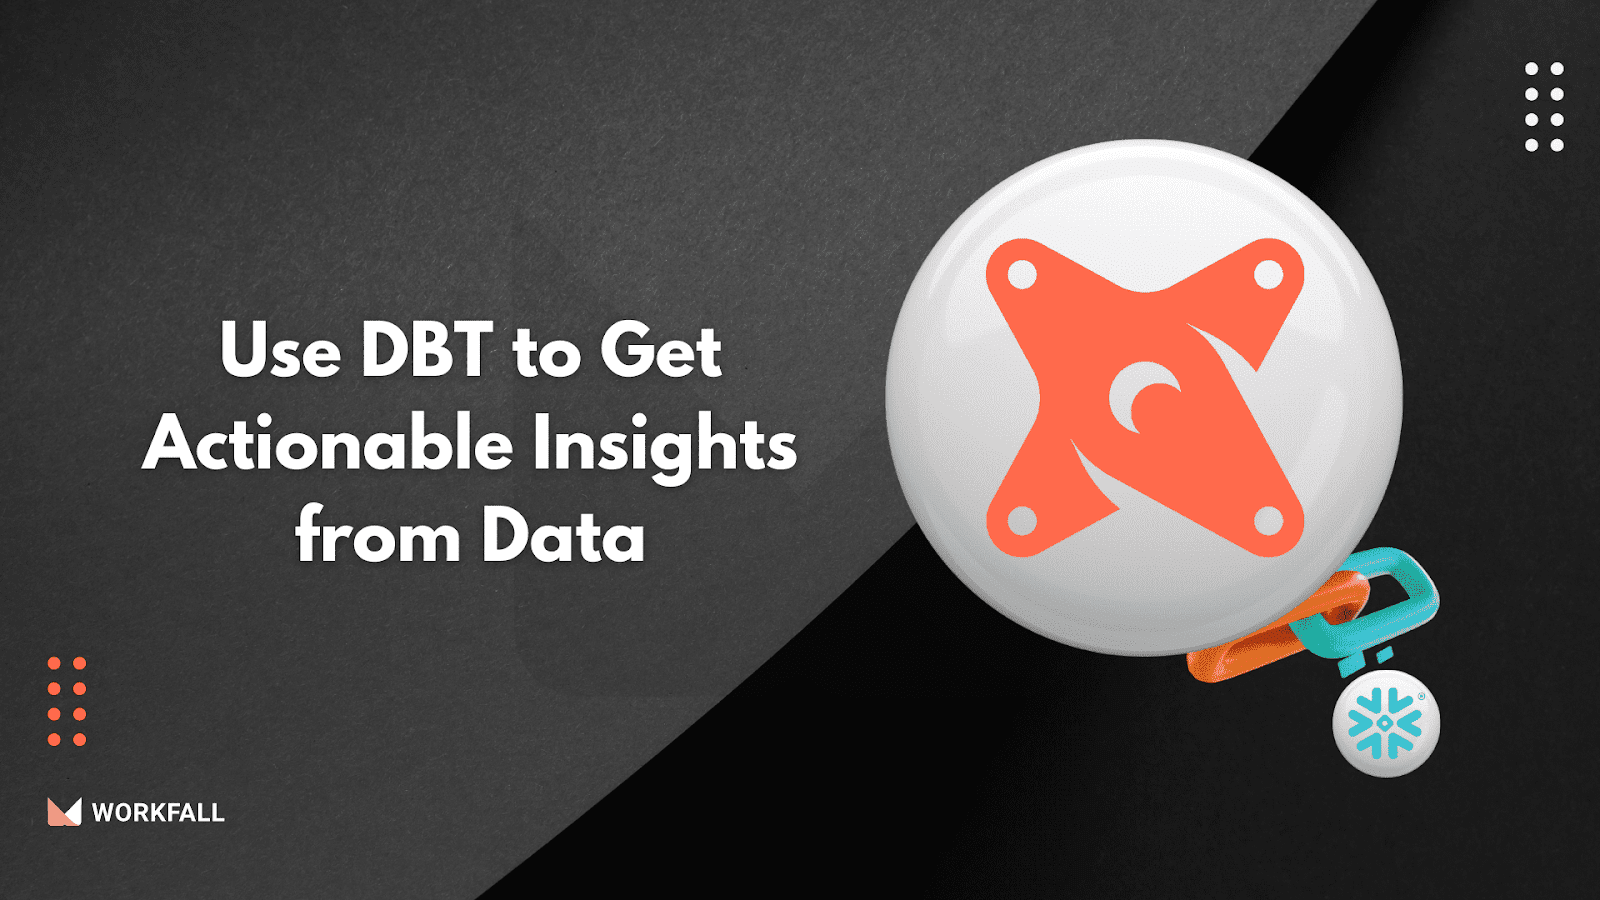 Use DBT to Get Actionable Insights from Data